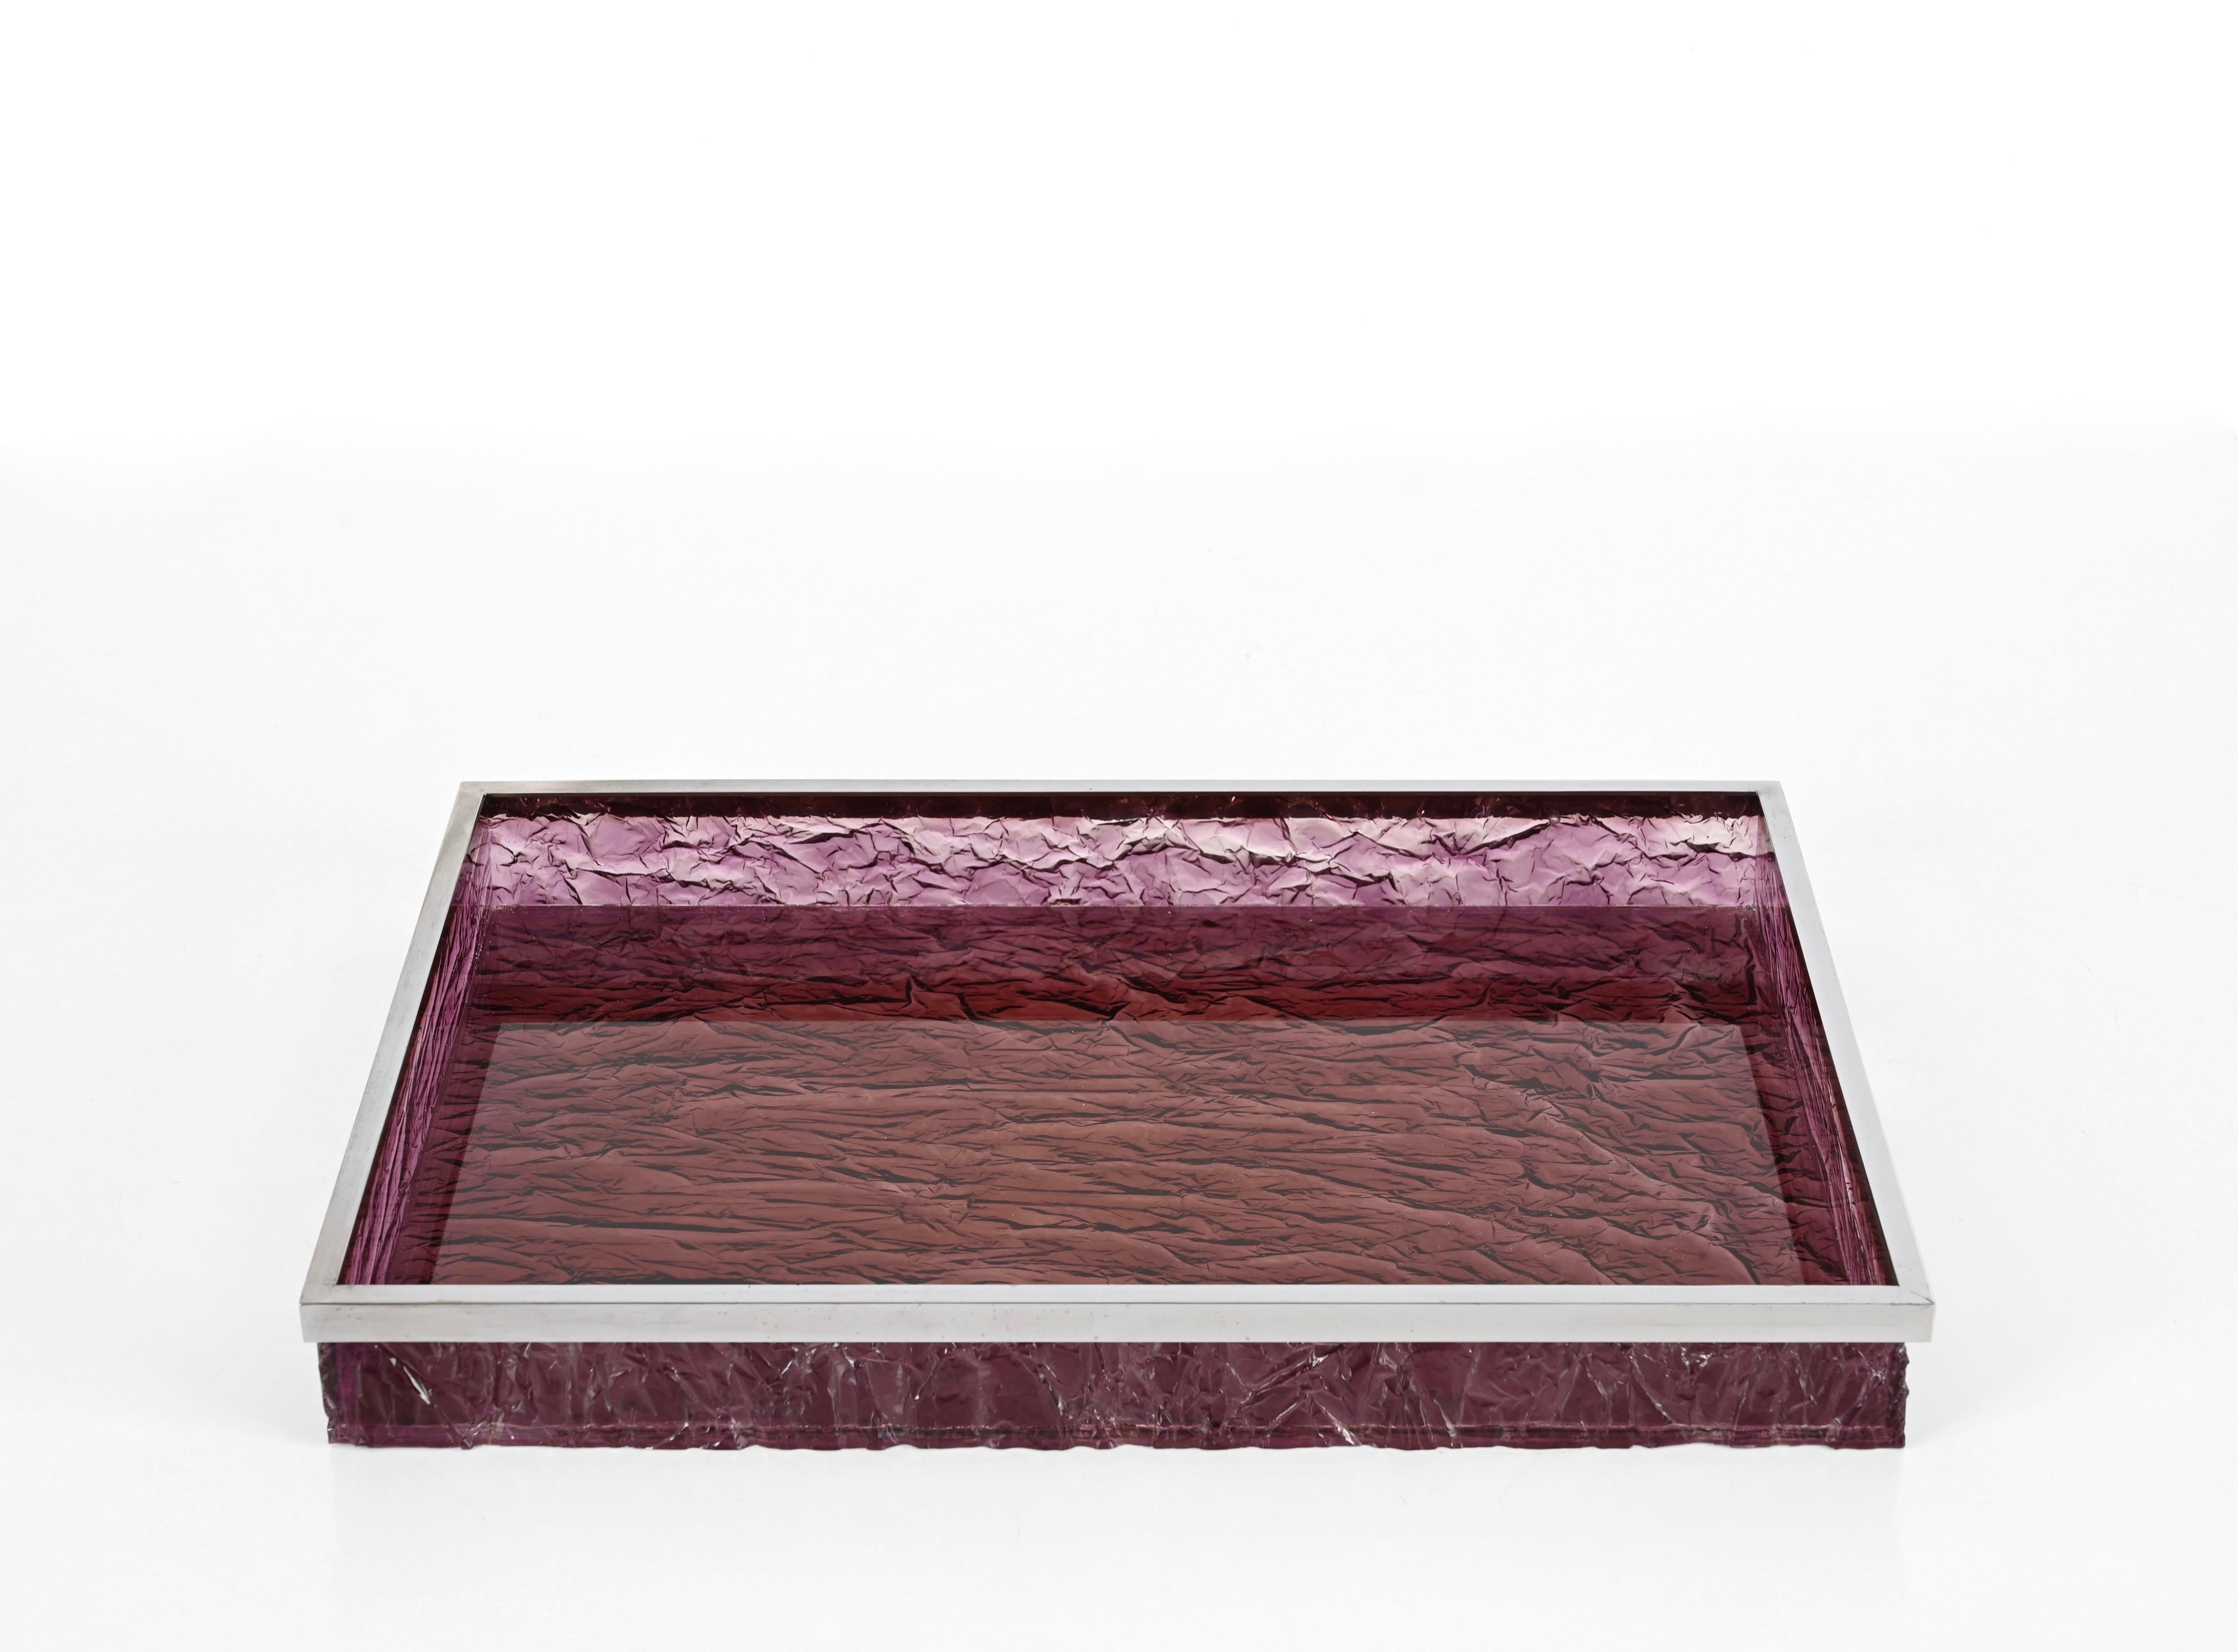 Gorgeous Mid-Century rectangular serving tray in an amazing purple ice effect lucite and chrome. This elegant piece was probably designed by Willy Rizzo in Italy in the 1970s for a Christian Dior production.

The quality of the ice effect lucite on